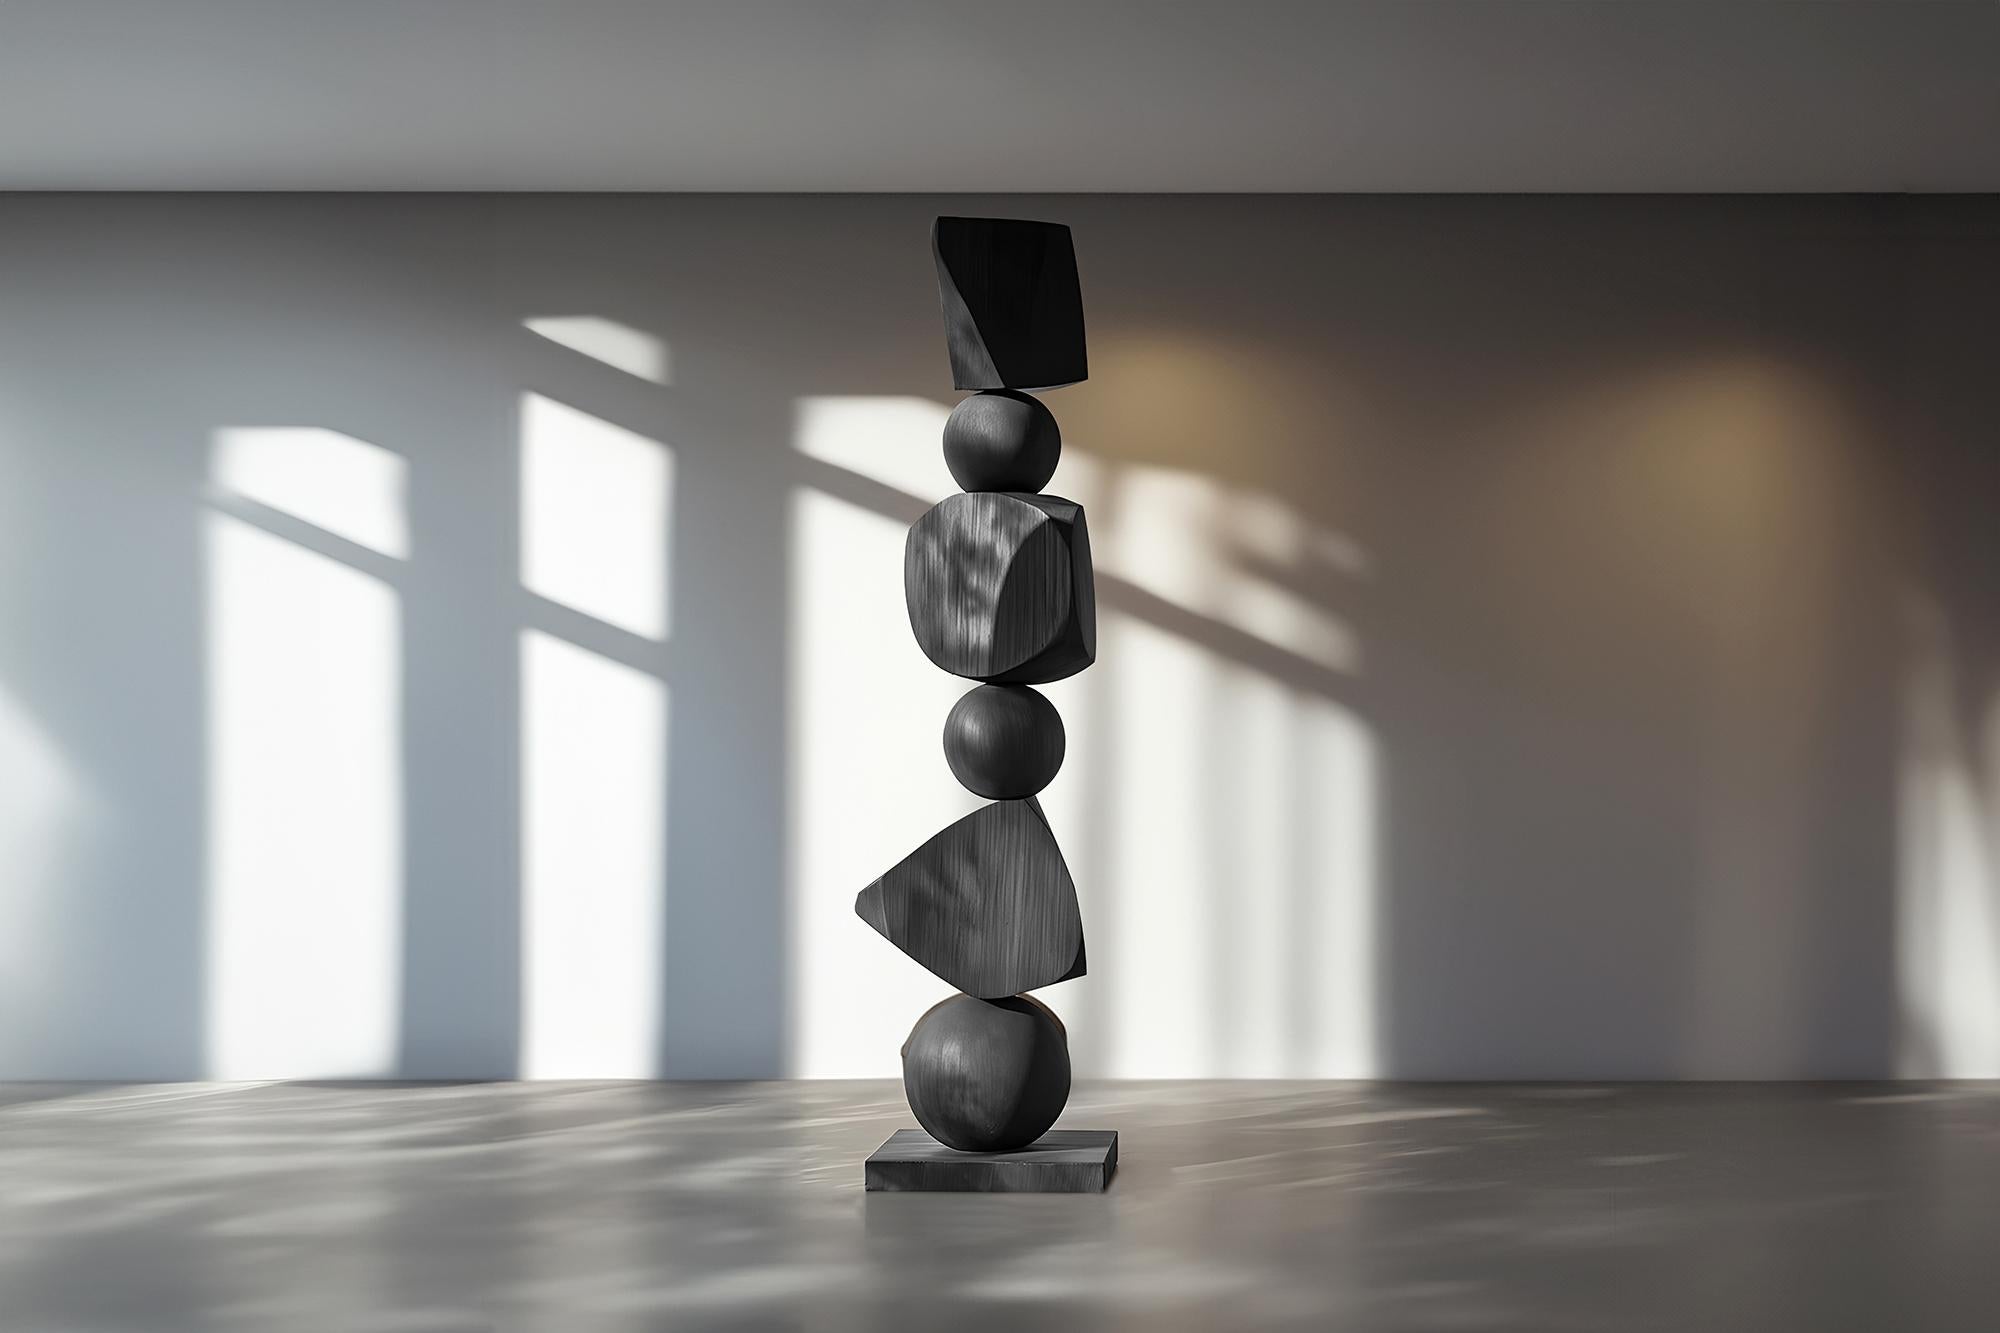 Abstract Elegance, Dark, Sleek Black Solid Wood by Escalona, Still Stand No98
——

Joel Escalona's wooden standing sculptures are objects of raw beauty and serene grace. Each one is a testament to the power of the material, with smooth curves that